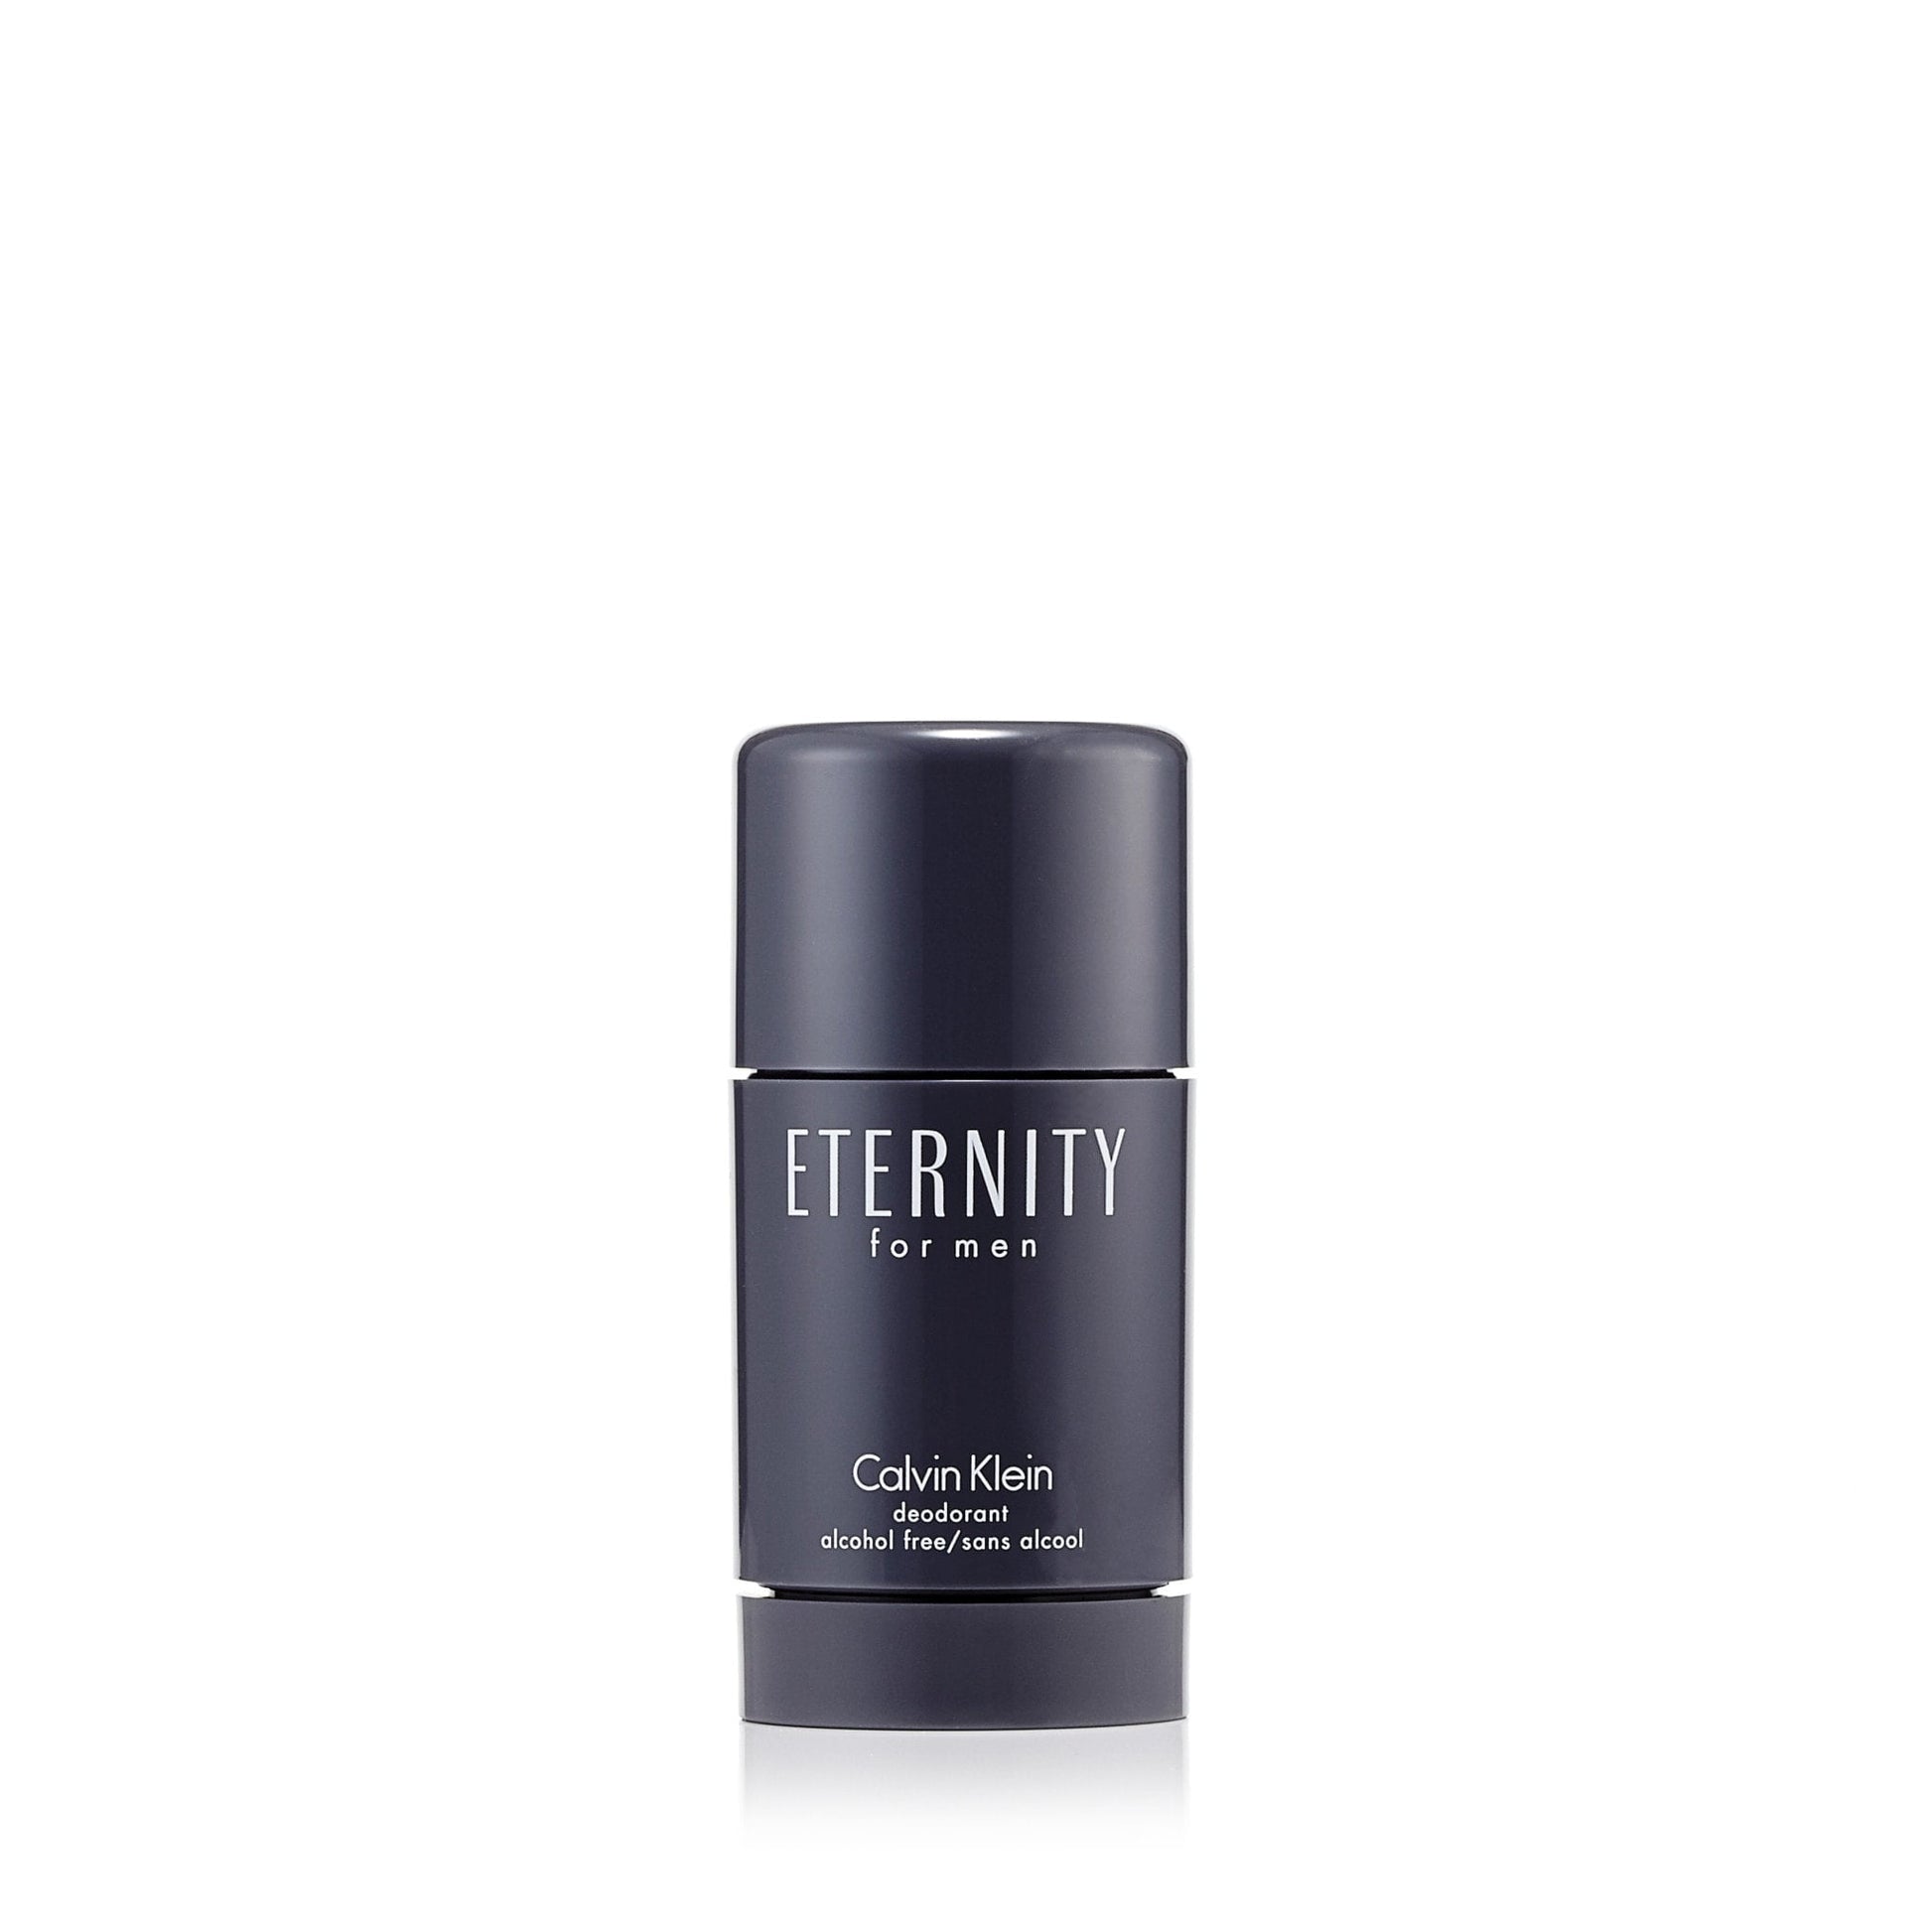 Eternity Deodorant for Men by Calvin Klein, Product image 1